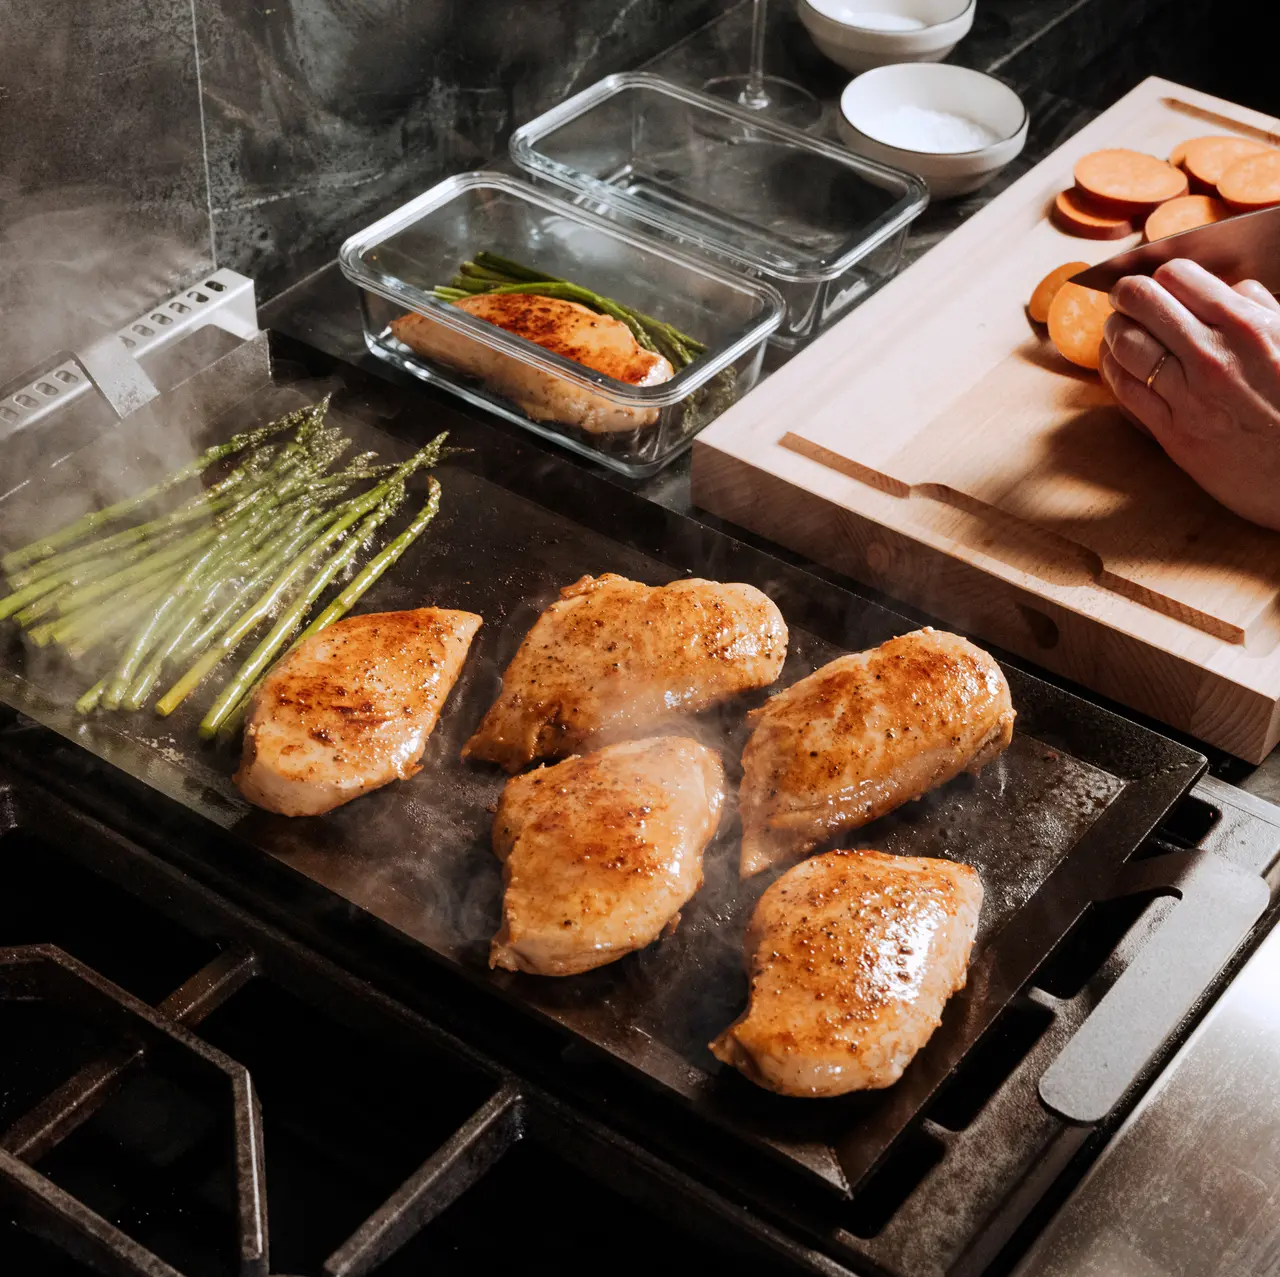 Chicken breasts are being seared on a stovetop griddle, surrounded by ingredients like asparagus, suggesting meal preparation.